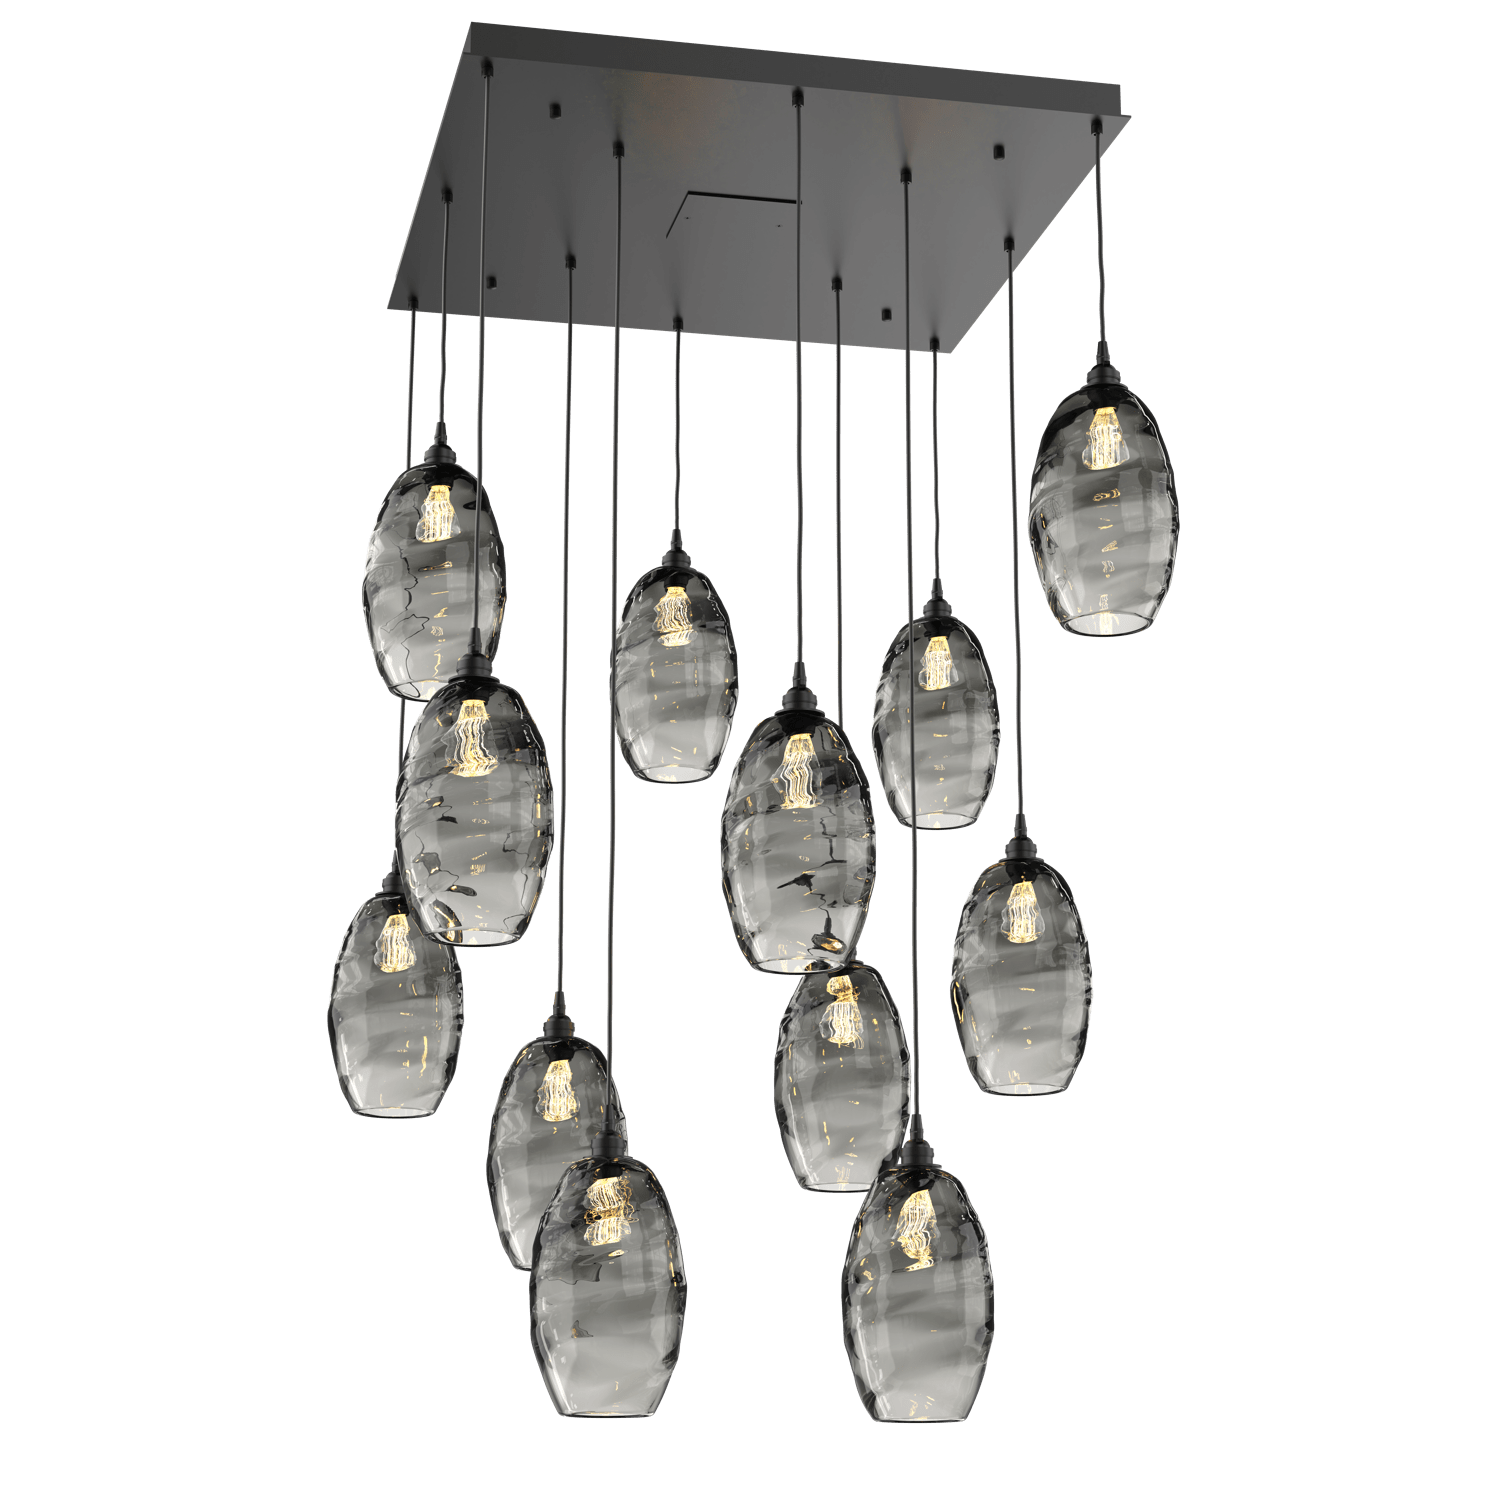 CHB0035-12-MB-OS-Hammerton-Studio-Optic-Blown-Glass-Elisse-12-light-square-pendant-chandelier-with-matte-black-finish-and-optic-smoke-blown-glass-shades-and-incandescent-lamping